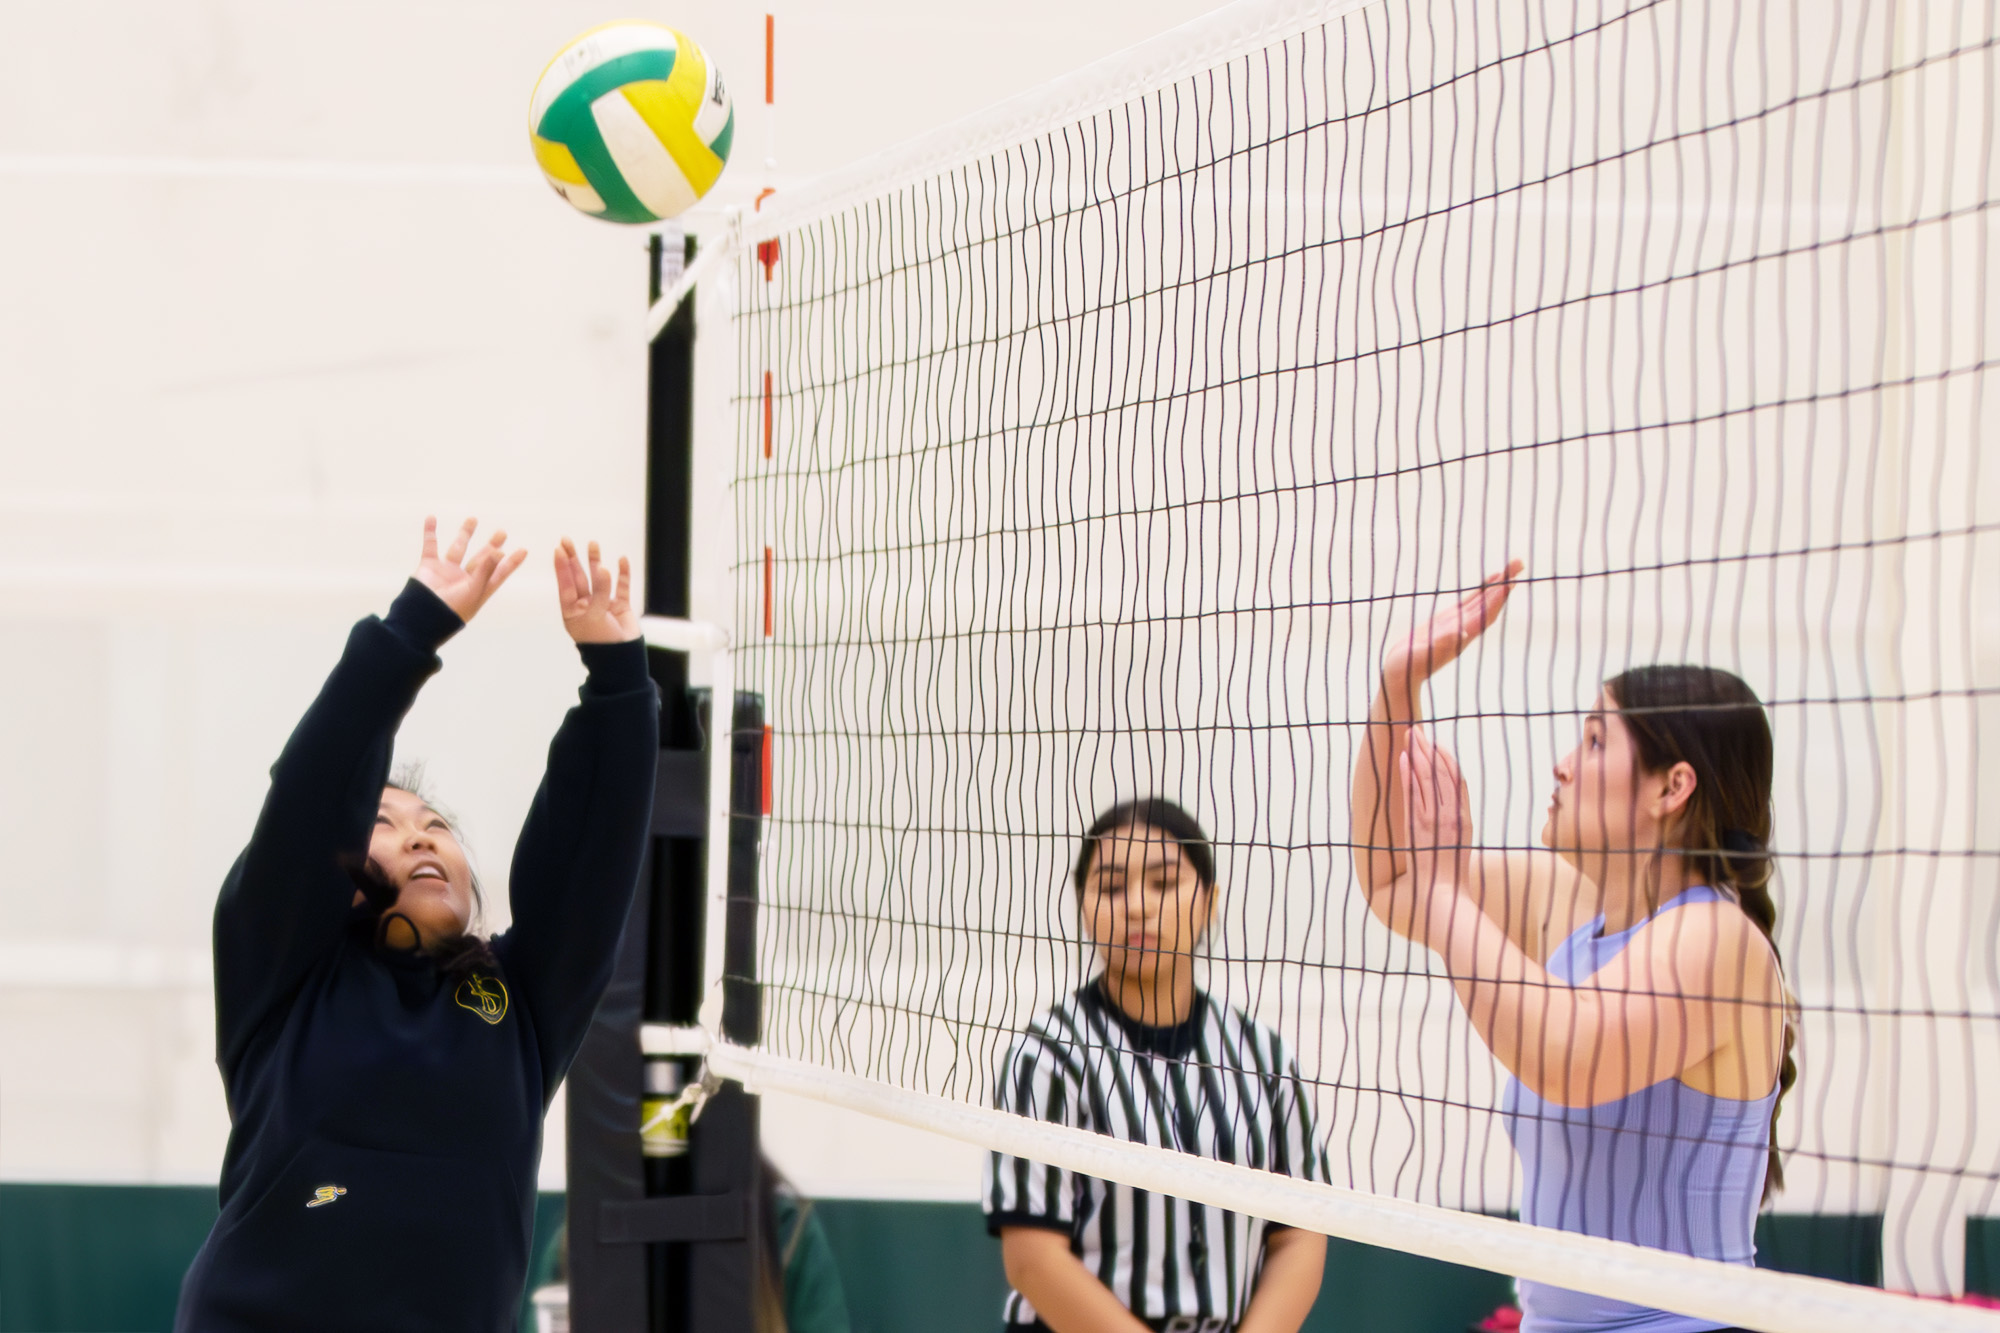 students hitting a volleyball over a net